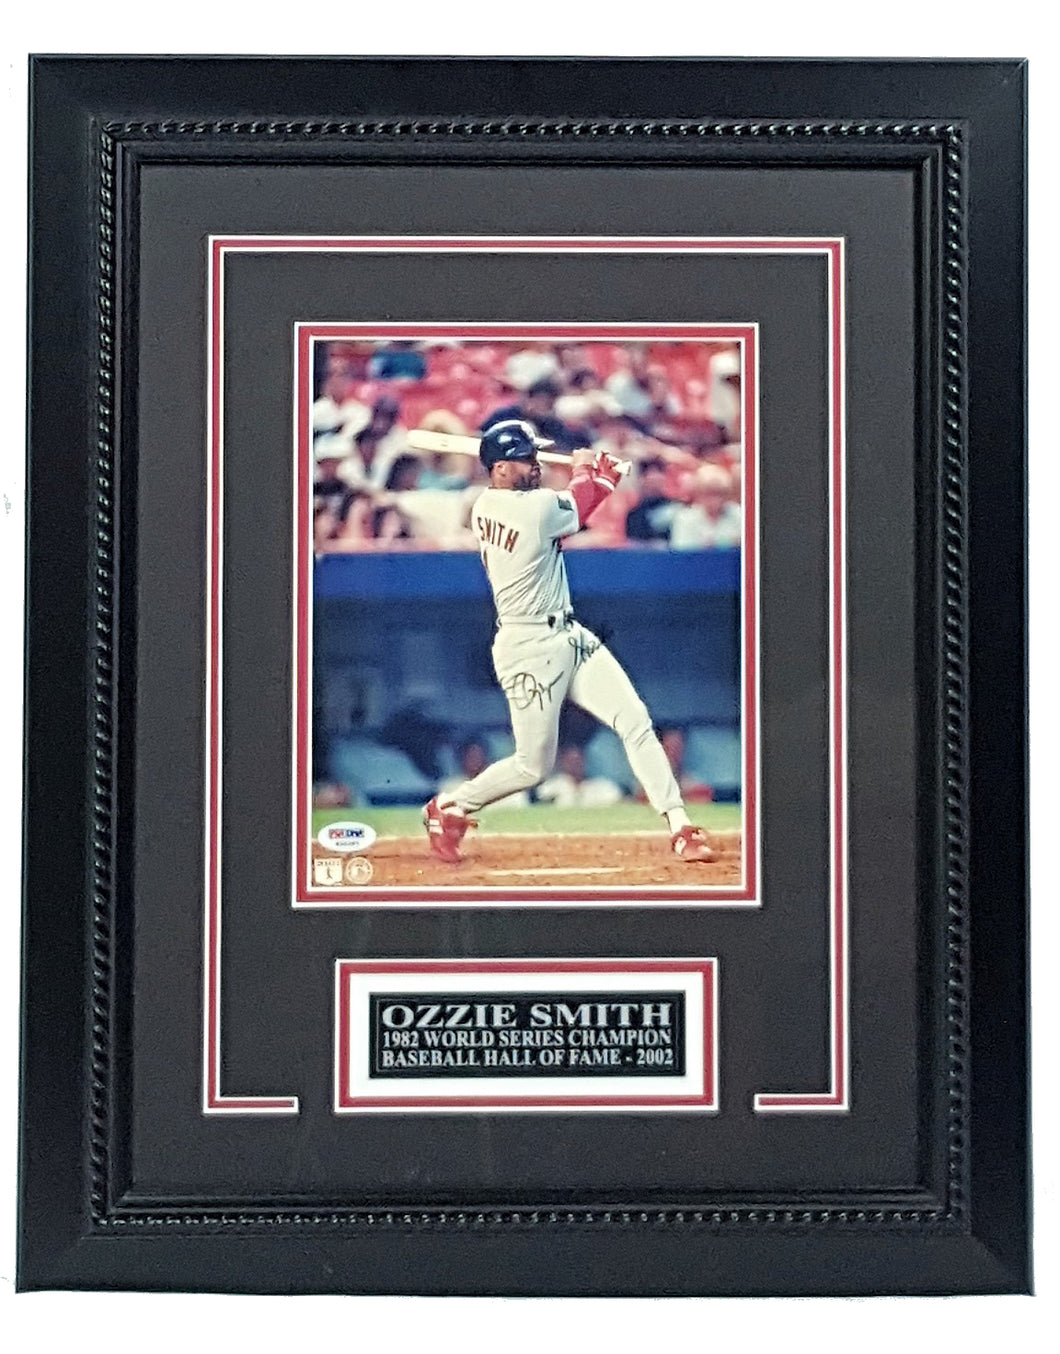 Ozzie Smith Signed Autographed 8x10 Framed